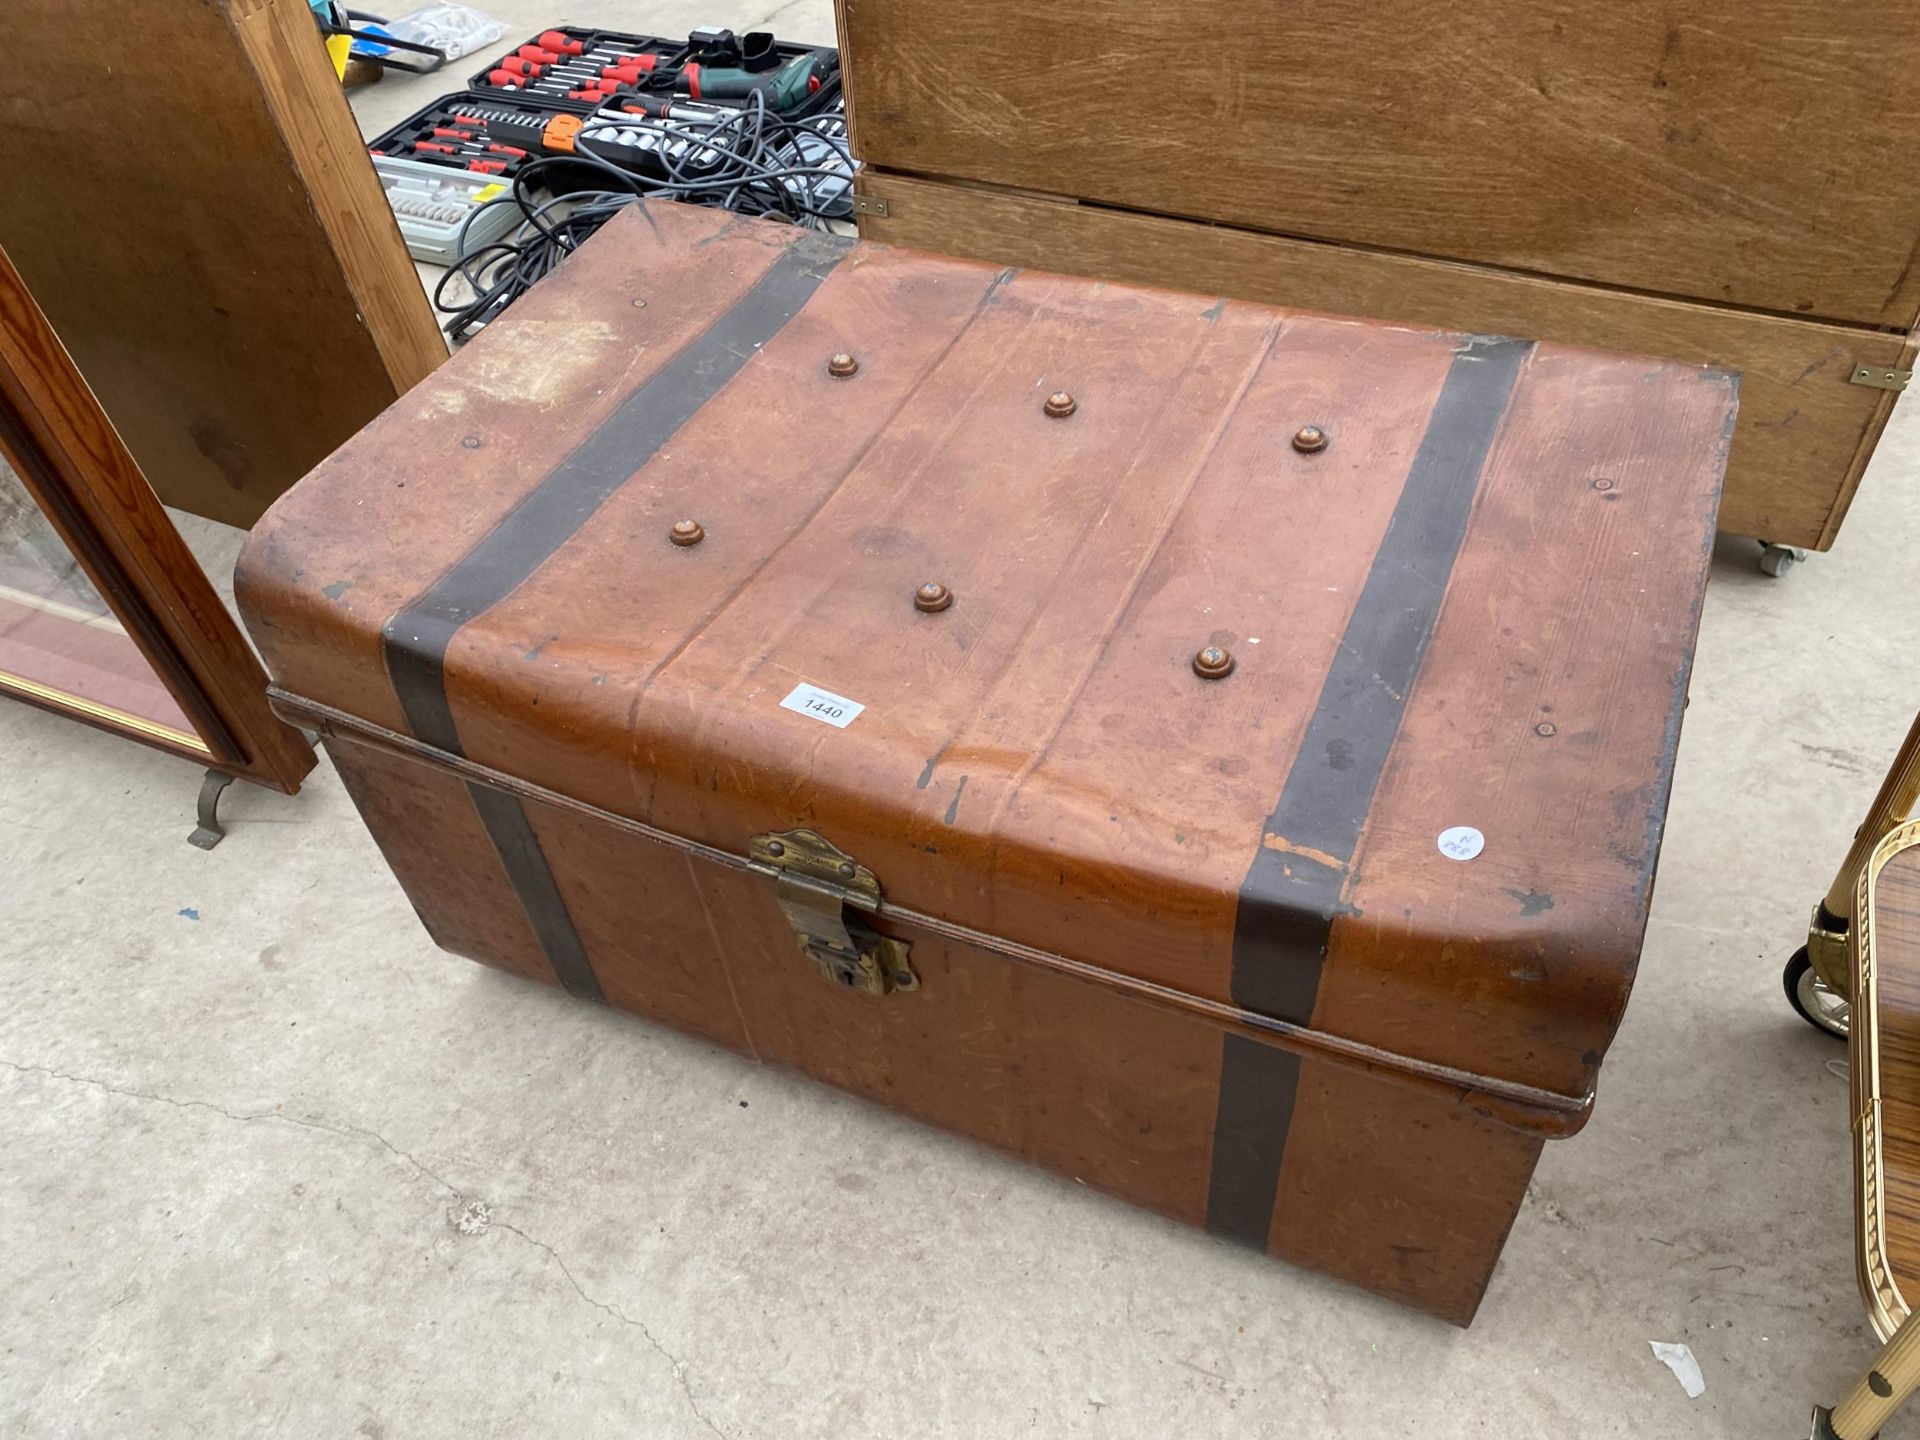 A VINTAGE METAL STORAGE TRUNK WITH TWO HANDLES AND CLASP